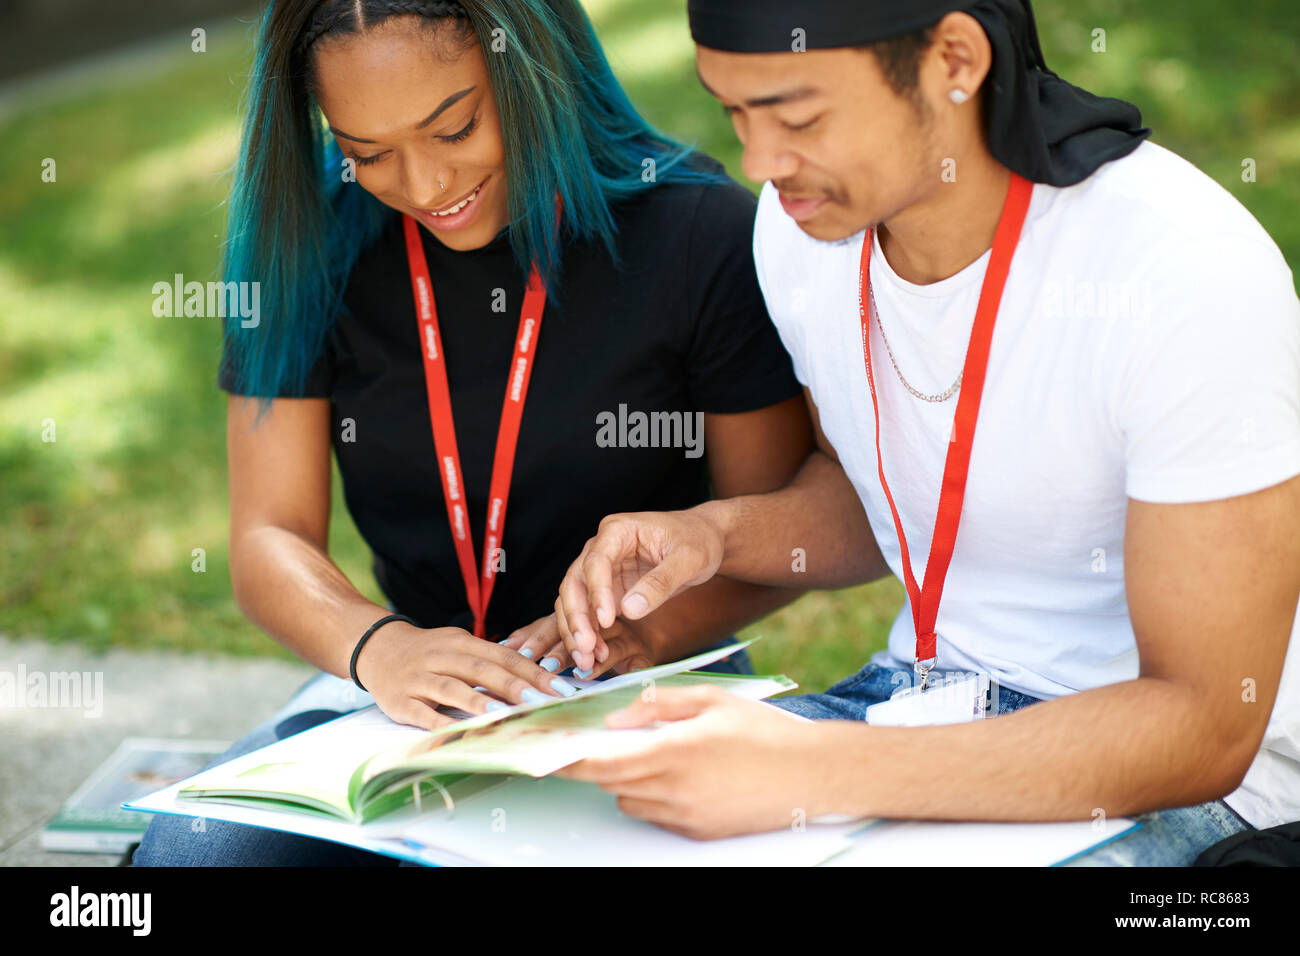 College students reading and talking in campus Stock Photo